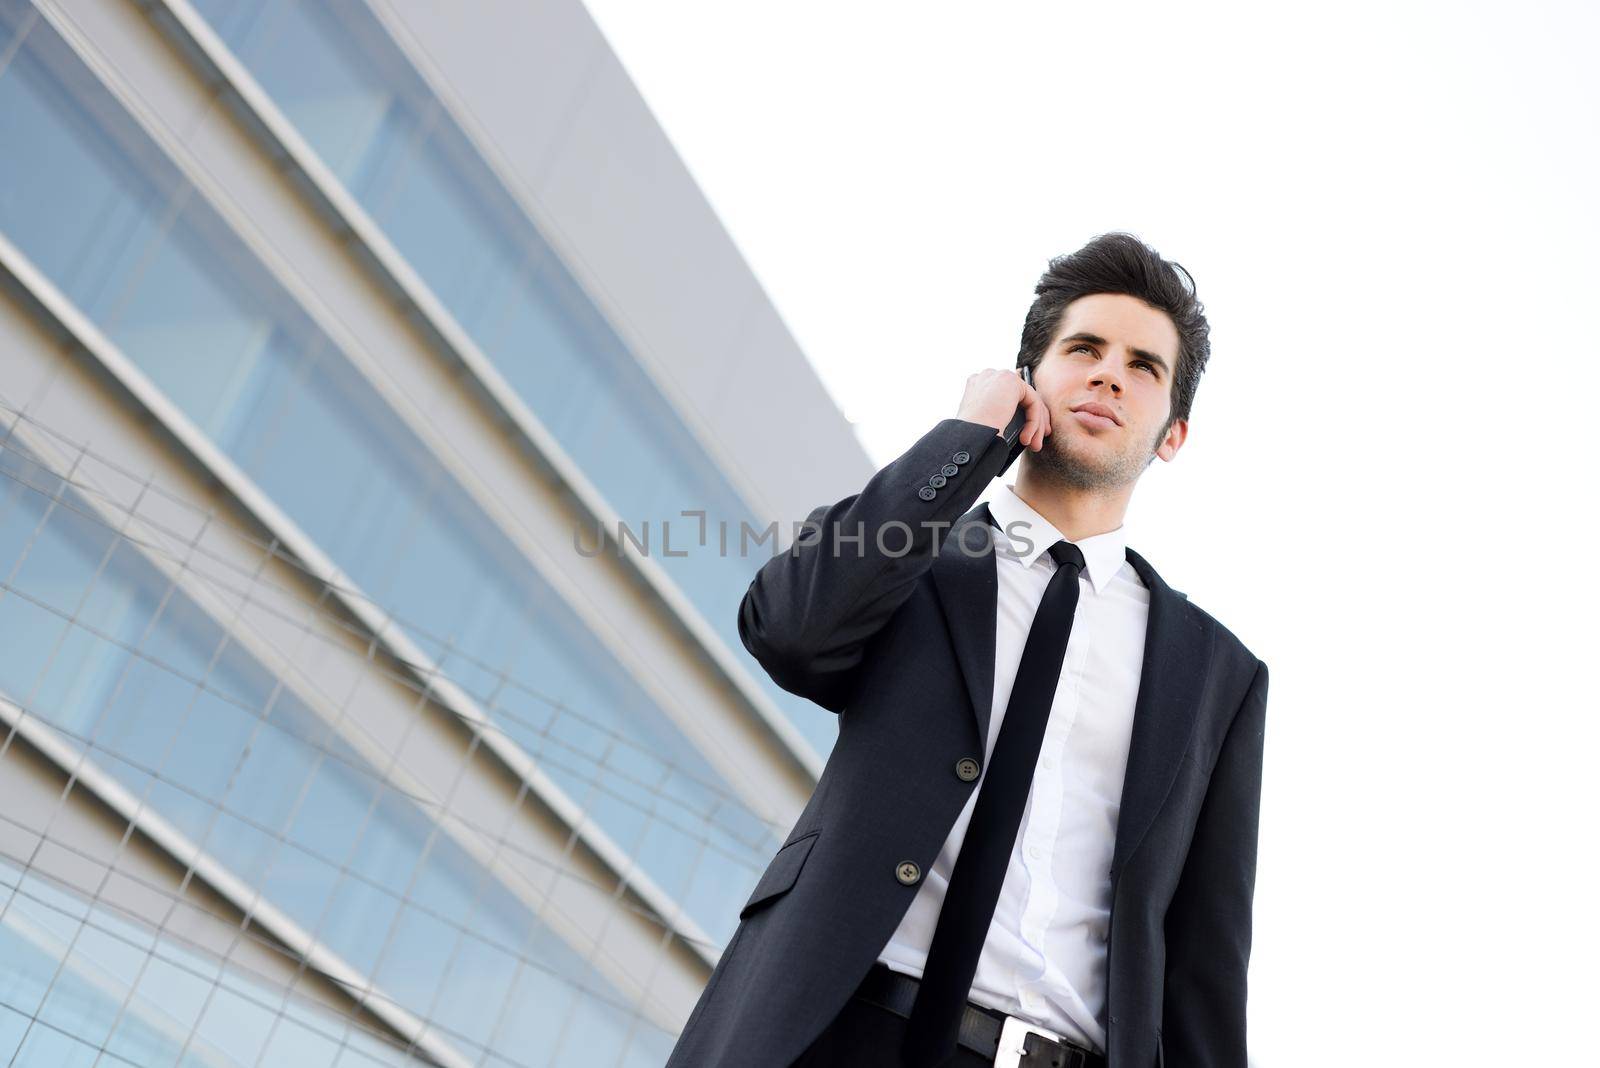 Portrait of an attractive young businessman on the phone in an office building